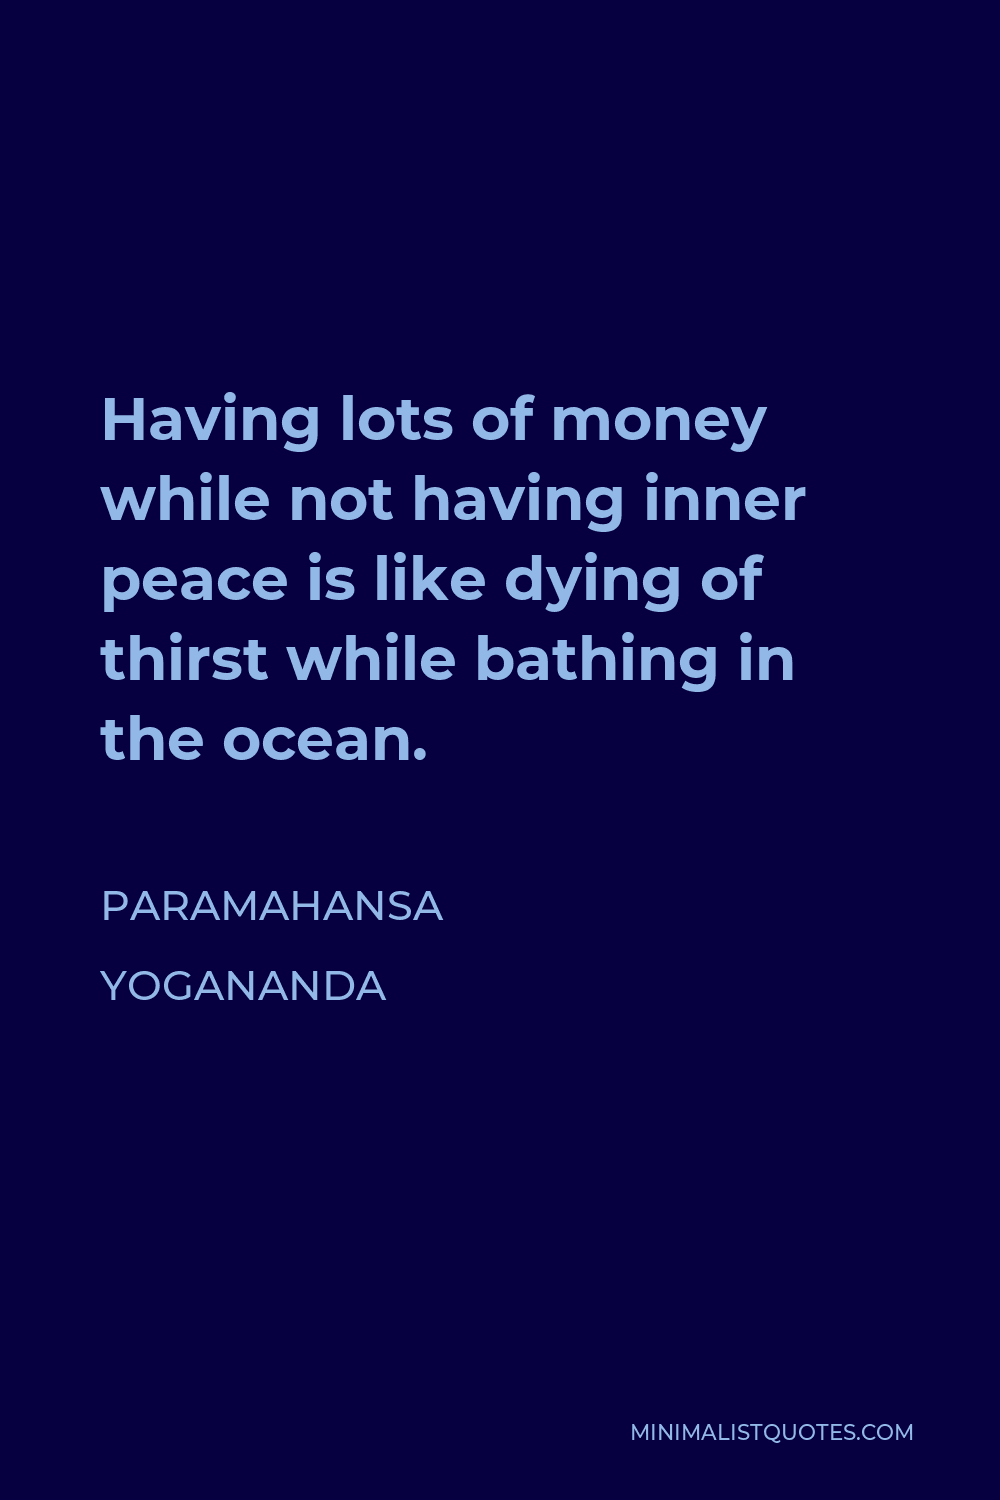 Paramahansa Yogananda Quote - Having lots of money while not having inner peace is like dying of thirst while bathing in the ocean.